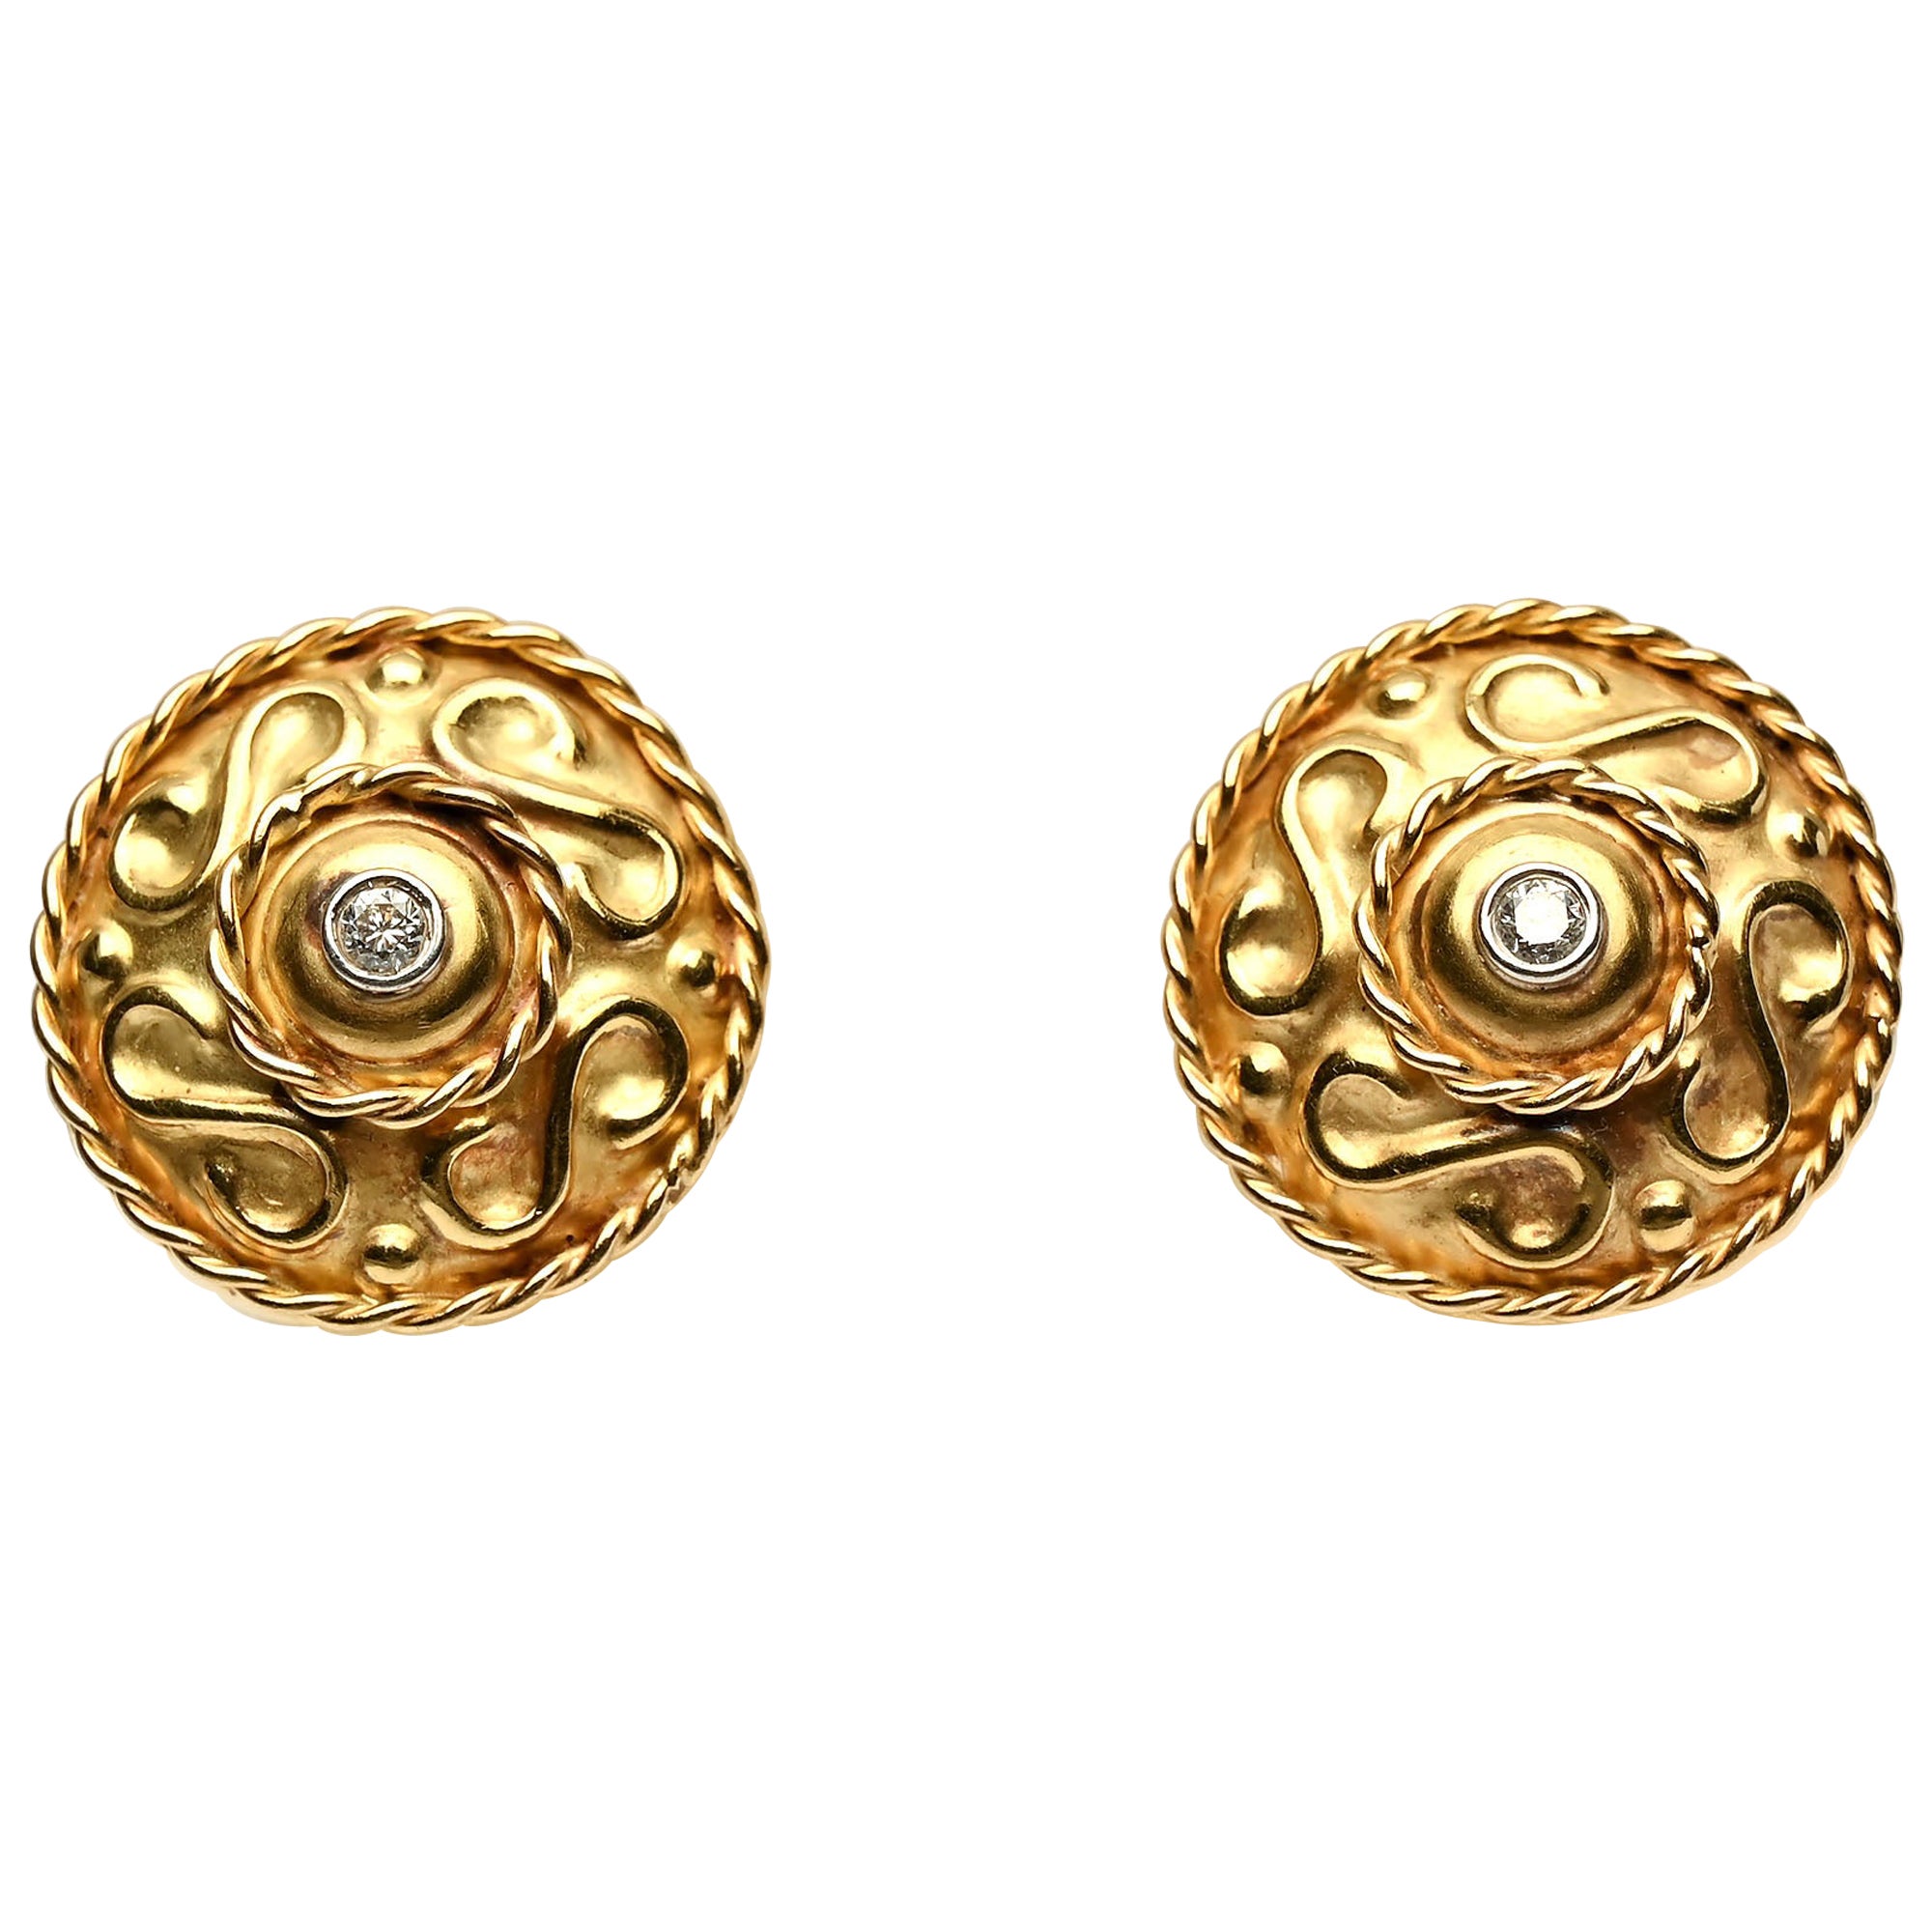 Round Gold Earrings with Center Diamond